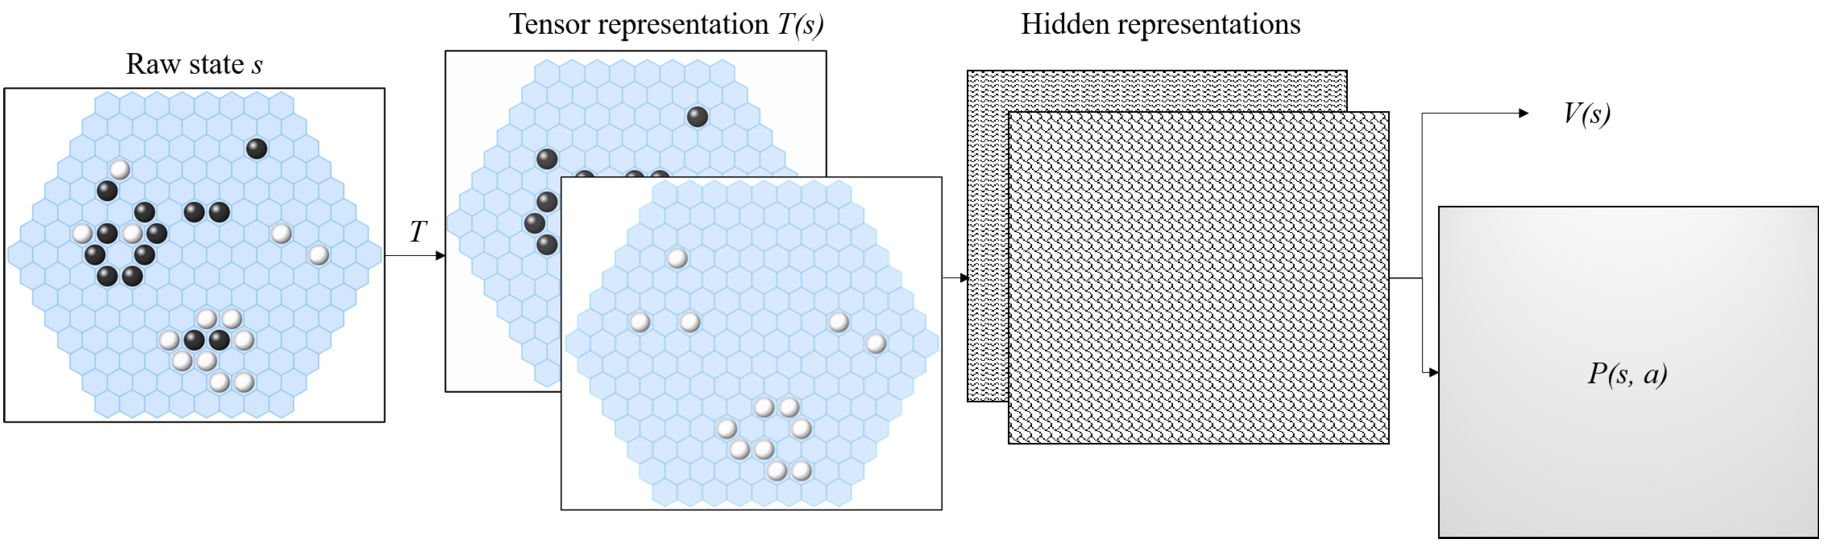 Basic architecture of DNNs for game playing. Raw game states s are transformed into a tensor representation T(s) of some fixed shape (often 3-dimensional). The DNN learns to compute hidden representations of its inputs in hidden layers. Finally, it computes a scalar value estimate V(s), and a discrete probability distribution P(s) with probabilities P(s,a) for all actions a in the complete action space.